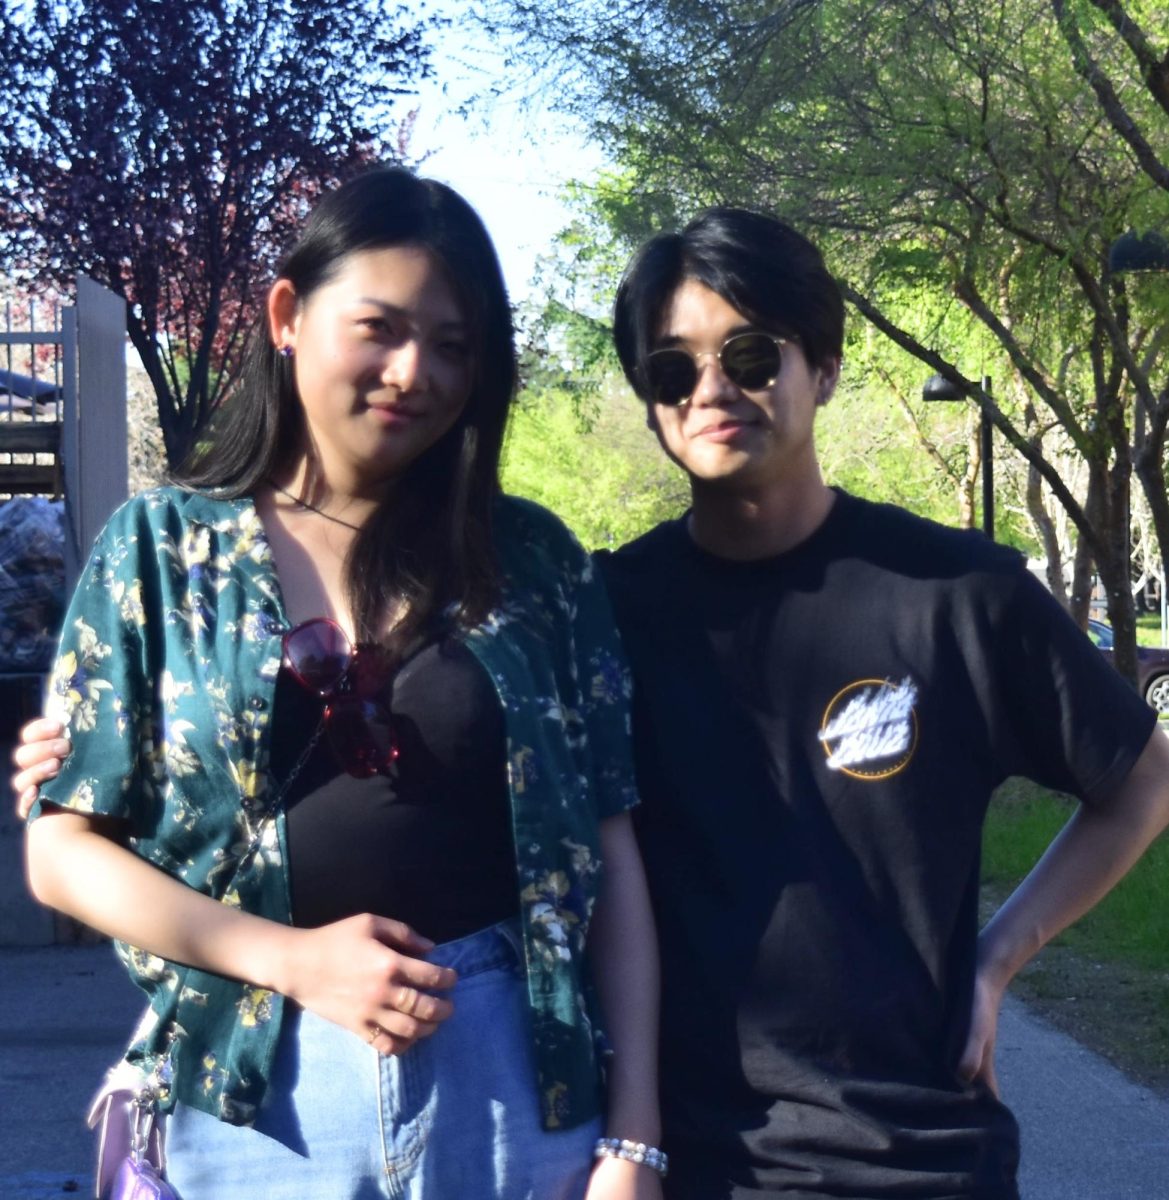  Maki Tsukasaki, 27, children care major (left of the photo) and Tok Doi 25, engineering major (right of photo) depart their final class together, walking around campus enjoying the warm spring weather.